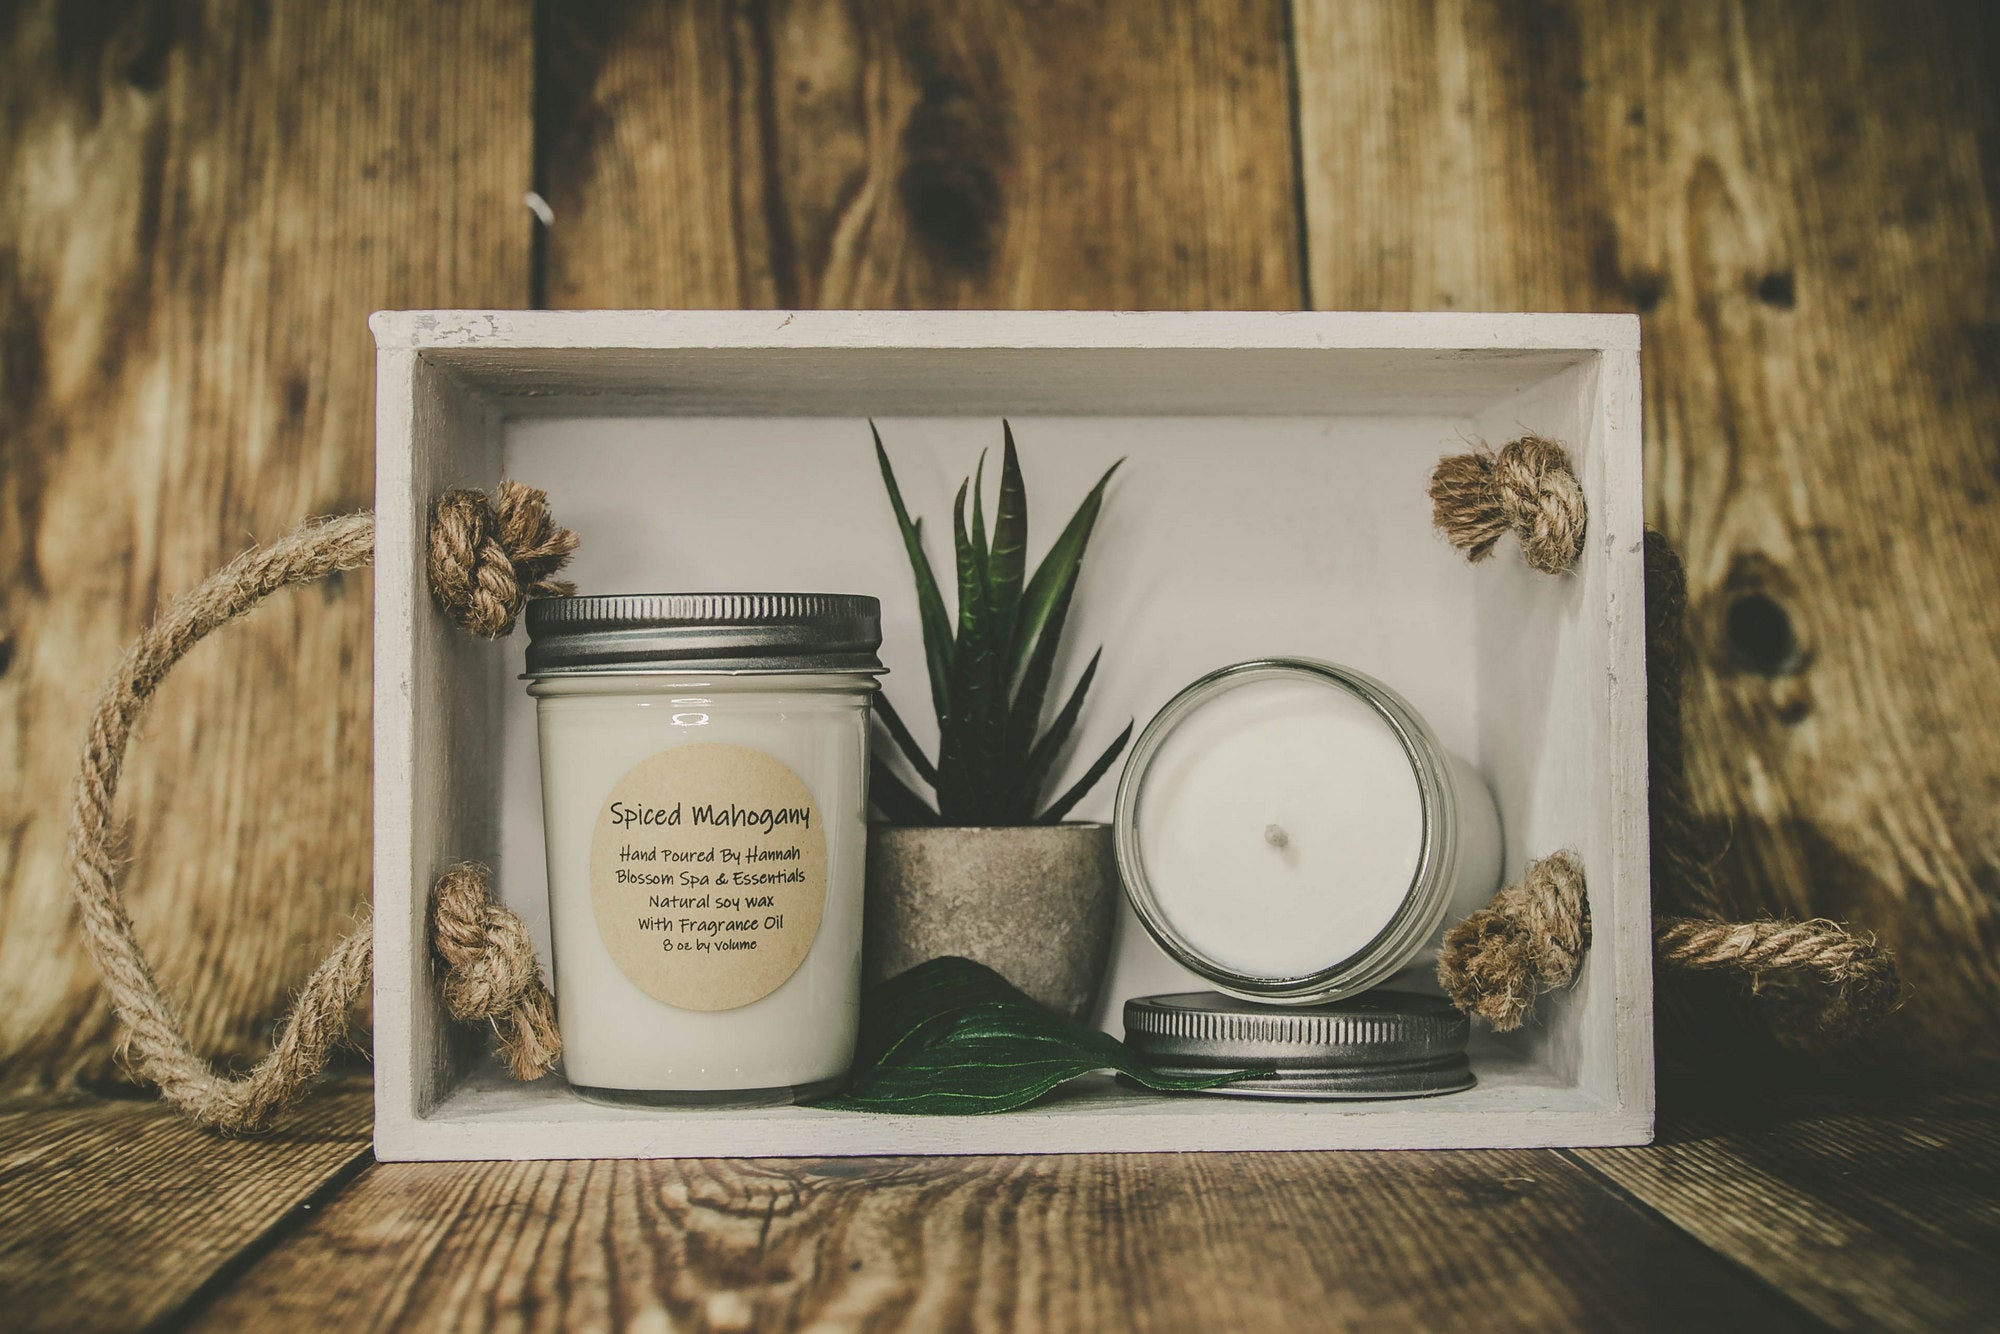 This candle has a great clean and fresh masculine scent. Made in the USA with 100% all natural soy wax for a clean, eco friendly burn. We use eco friendly wicks for a steady flame. Notes: Italian Bergamot, Applewood, Tonka Bean, Patchouli, Cedarwood, Oakmoss, Cardamom, Vanilla Bourbon, and Allspice. Contact us for local delivery and pickup. jar candles large scented candles soy candles benefits cheap soy candles 100% soy candles soy candles for sale